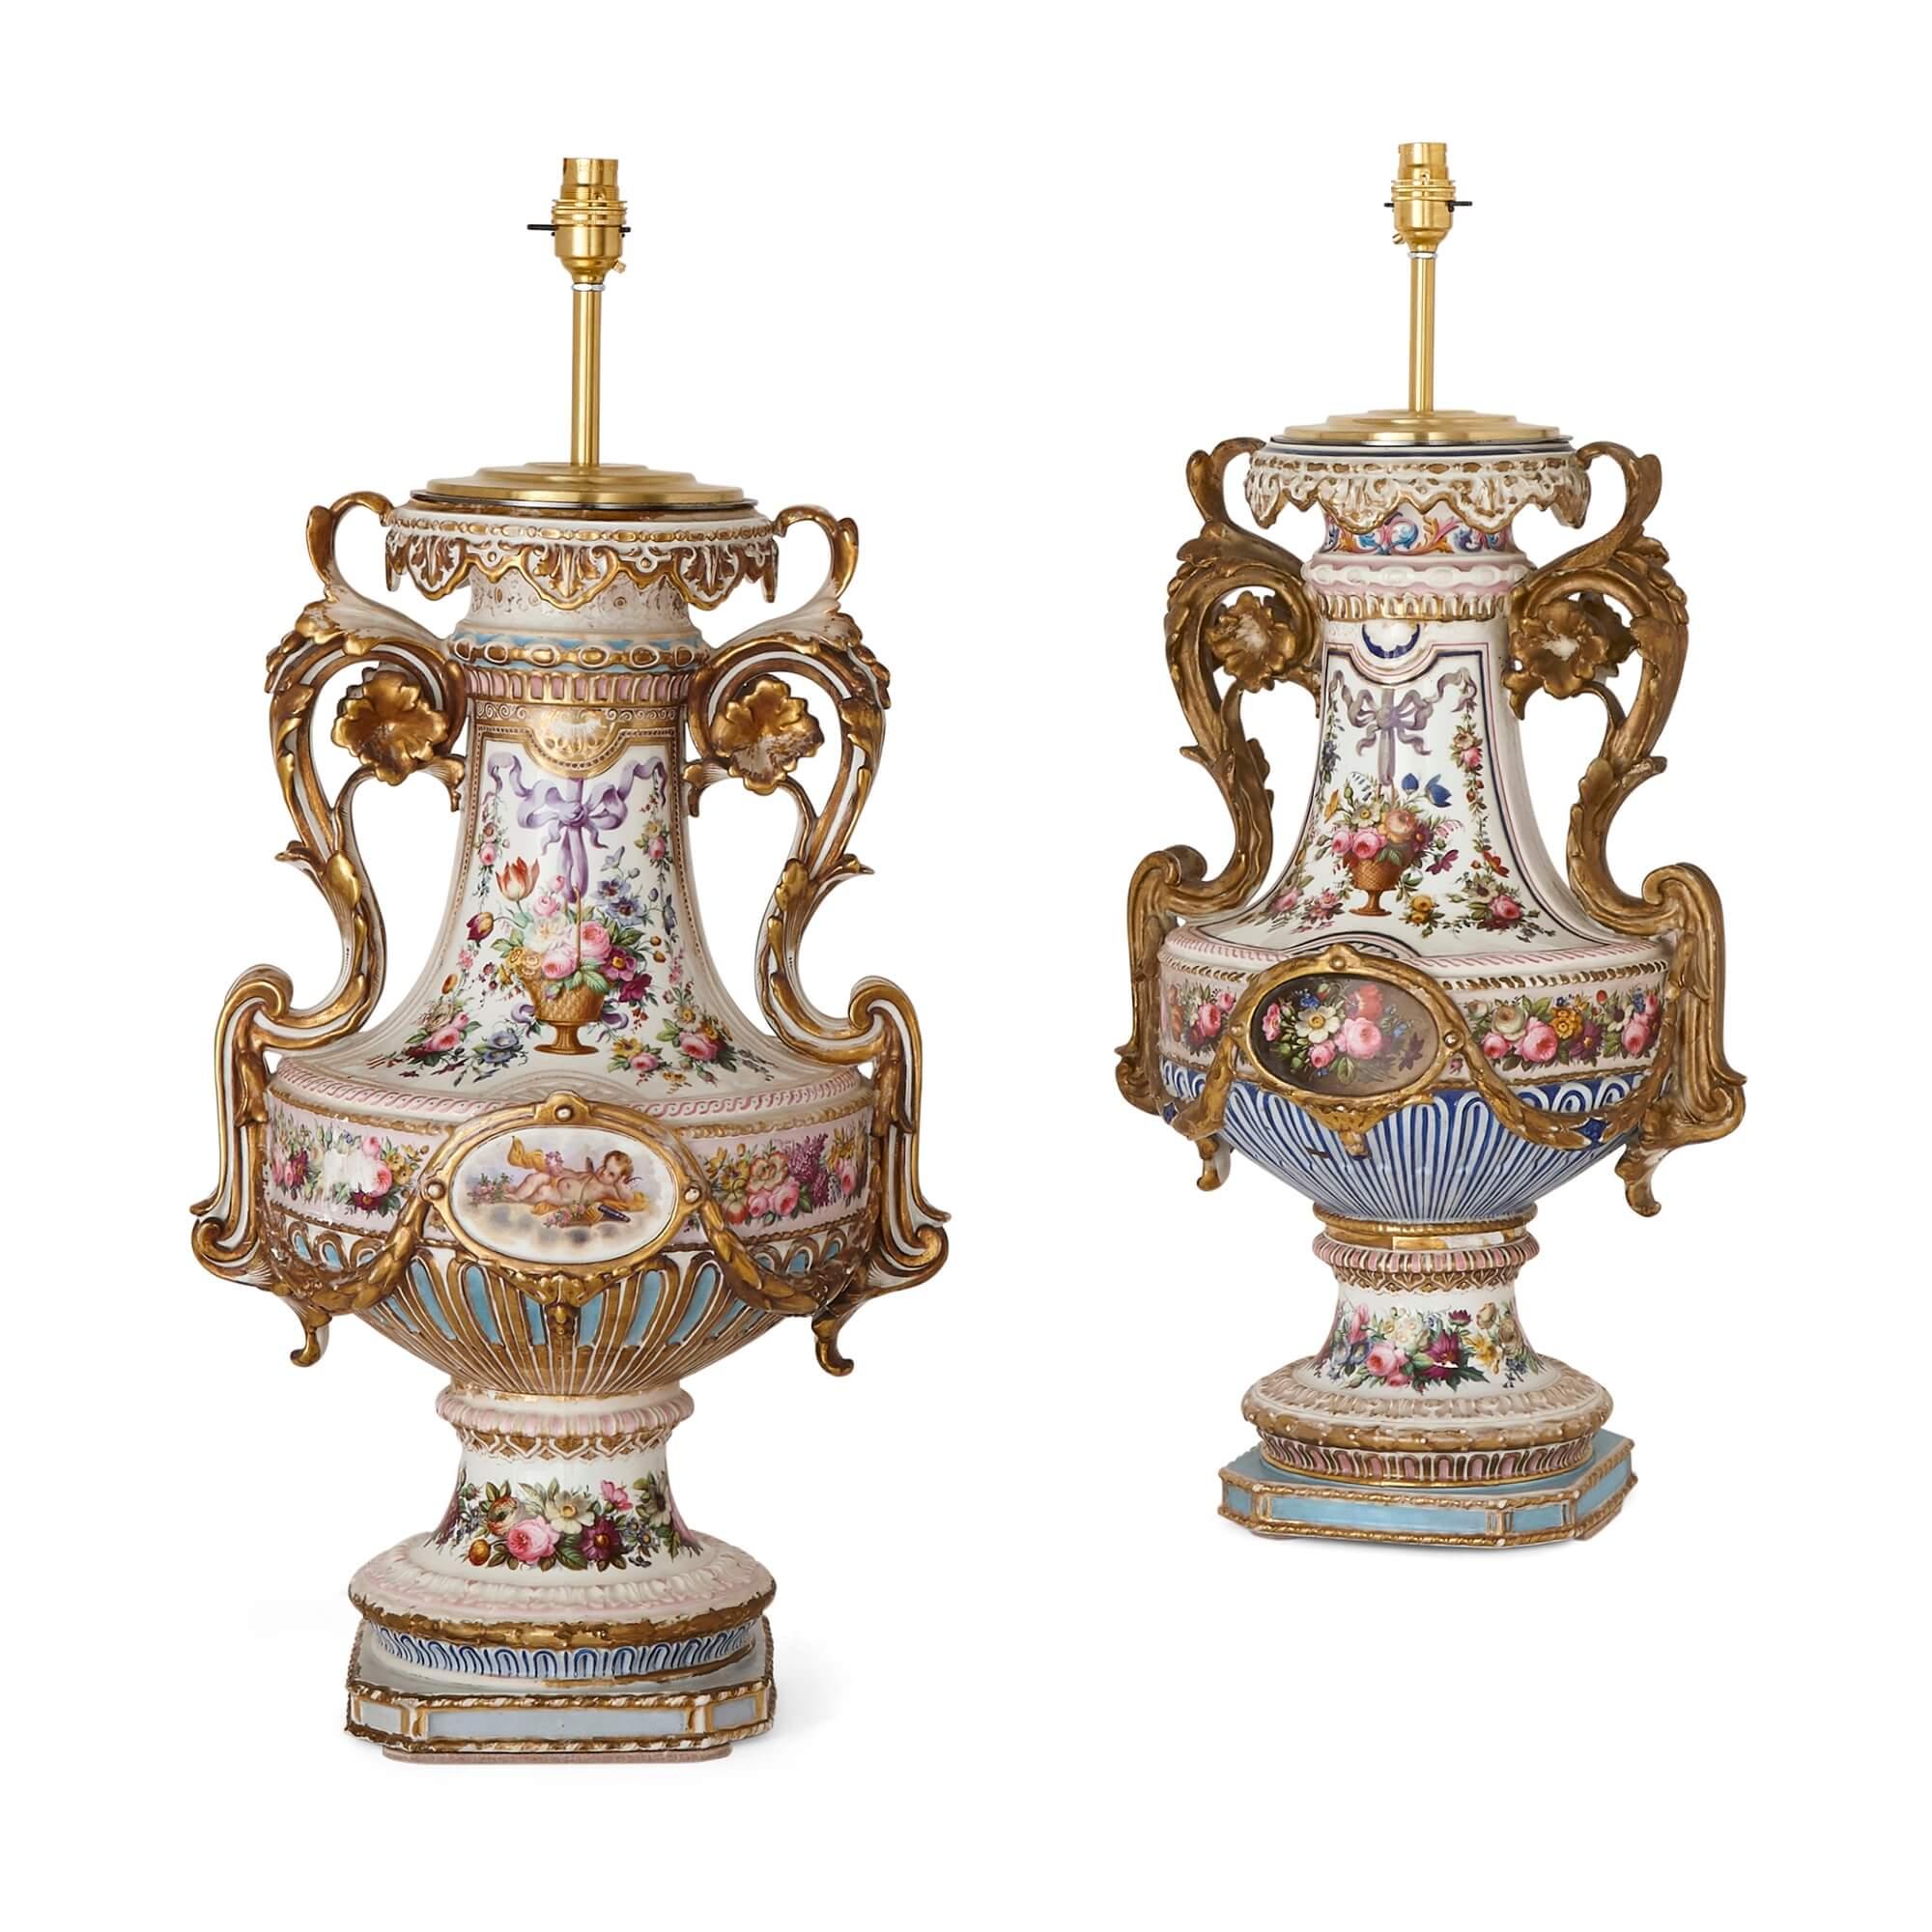 Pair of antique florally decorated porcelain lamps
French, 19th century
Measures: With shades: Height 101cm, width 49cm, depth 36cm
Without shades: Height 69cm, width 33cm, depth 28cm

The porcelain lamps in this pair are striking examples of